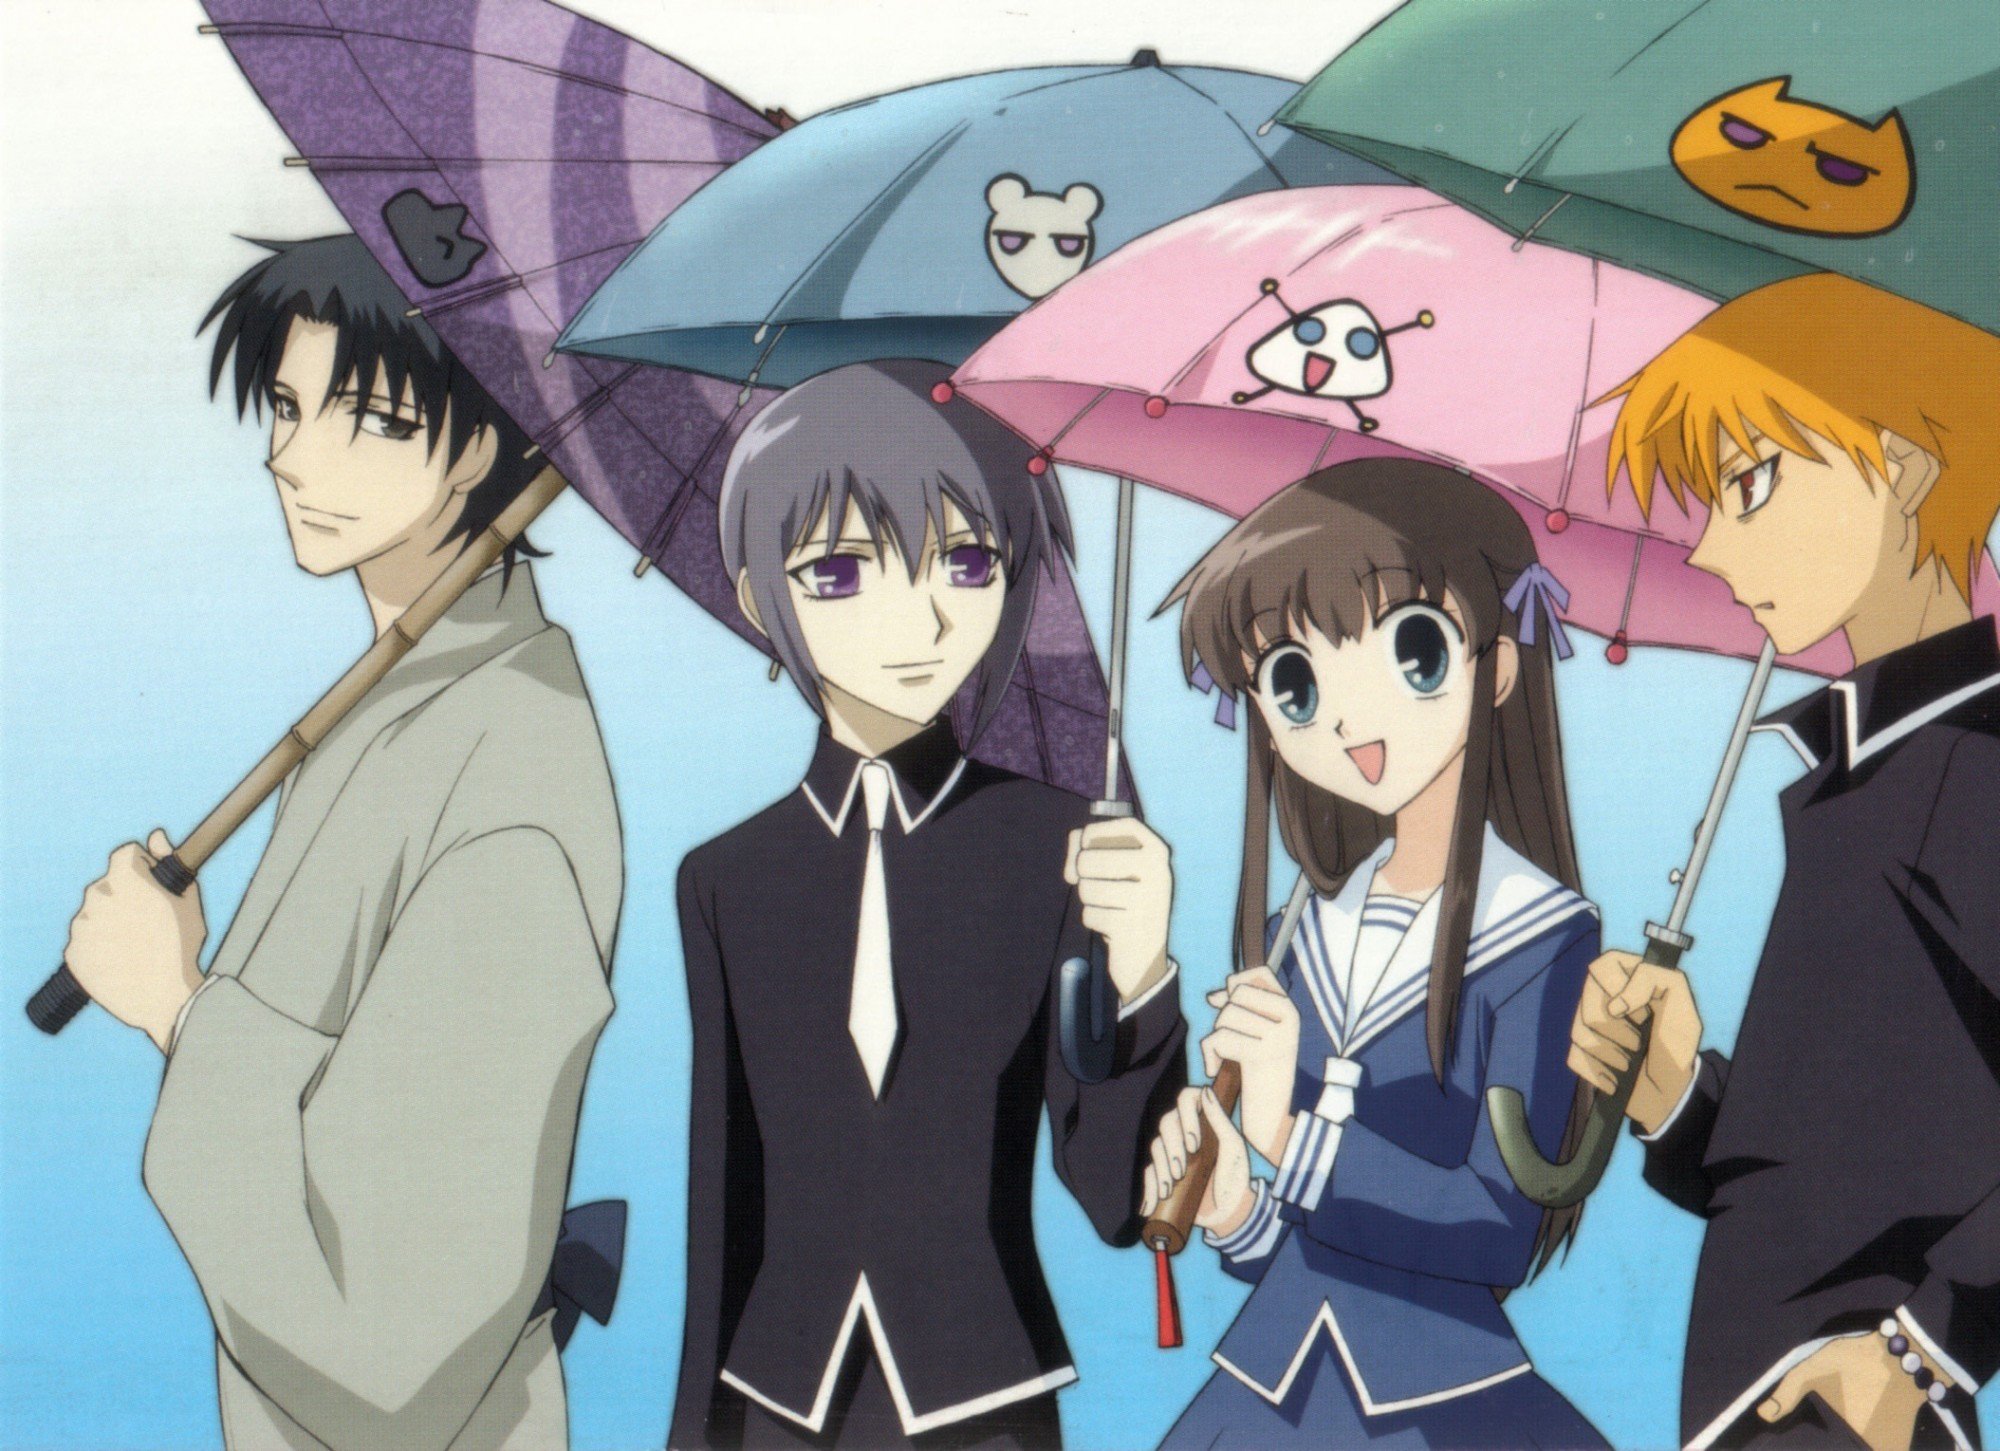 Fruits Basket Will Be Receiving a NEW Anime